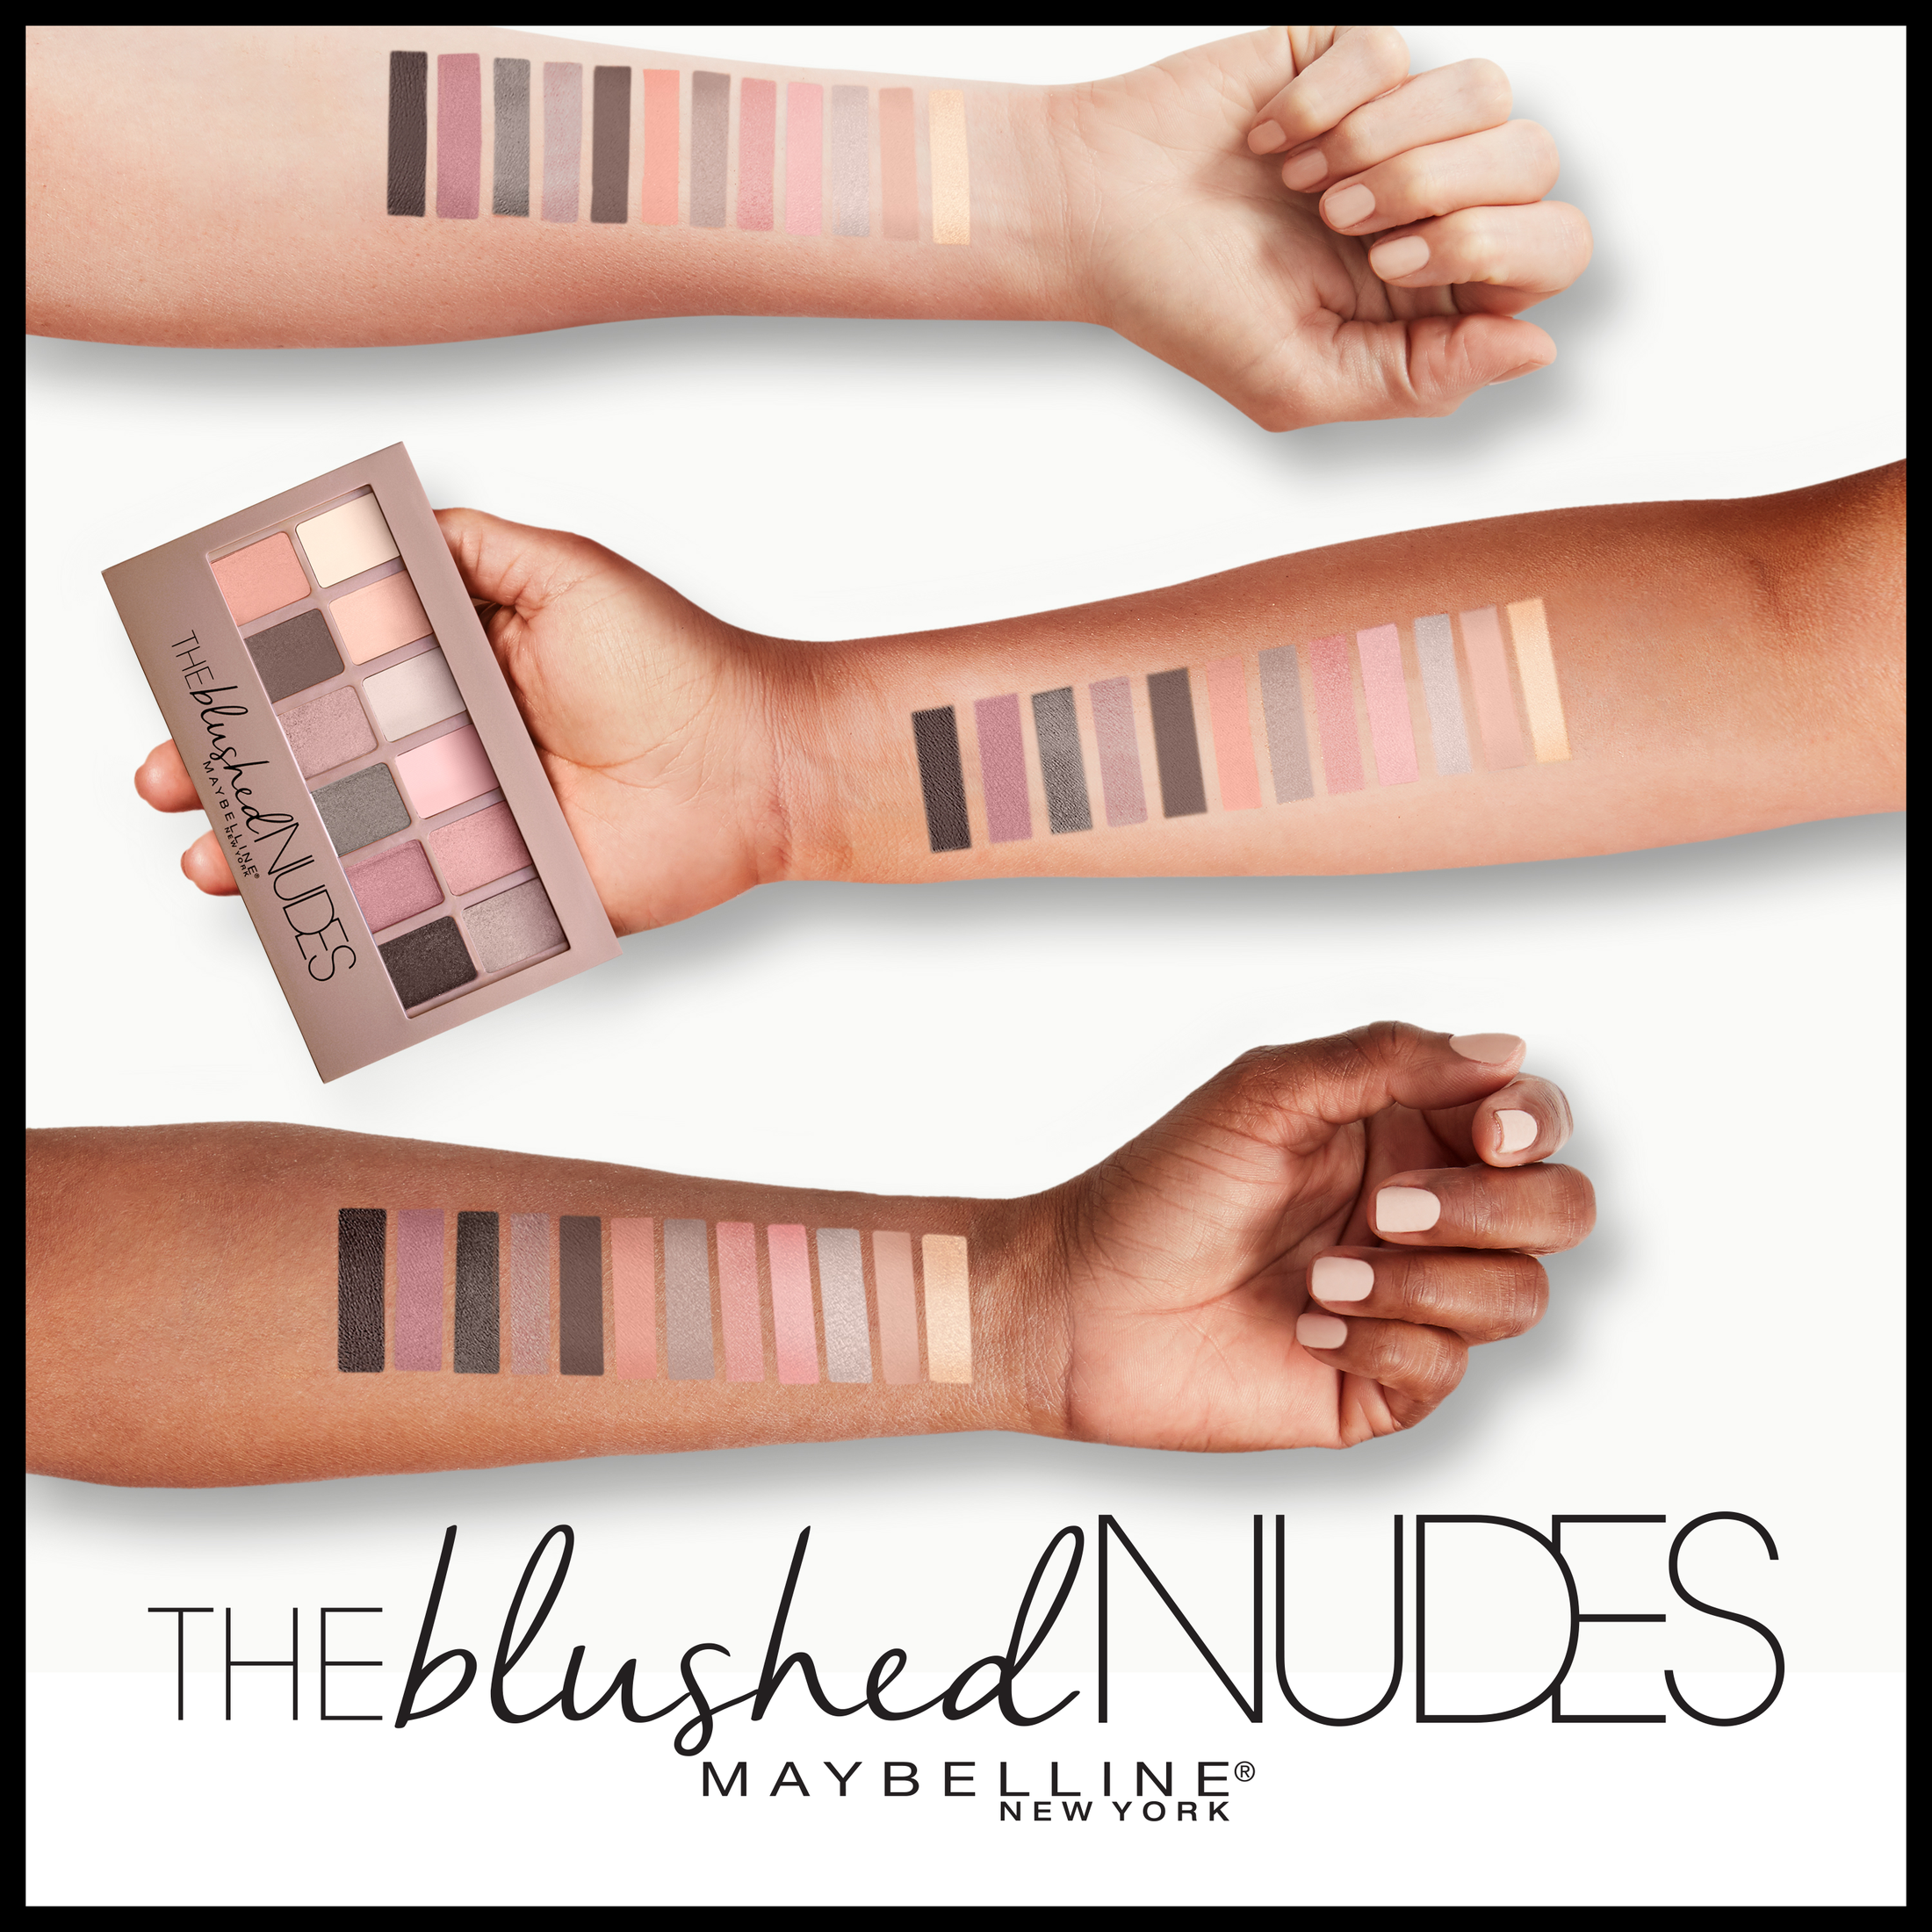 Maybelline The Blushed Nudes Eyeshadow Palette - image 5 of 7